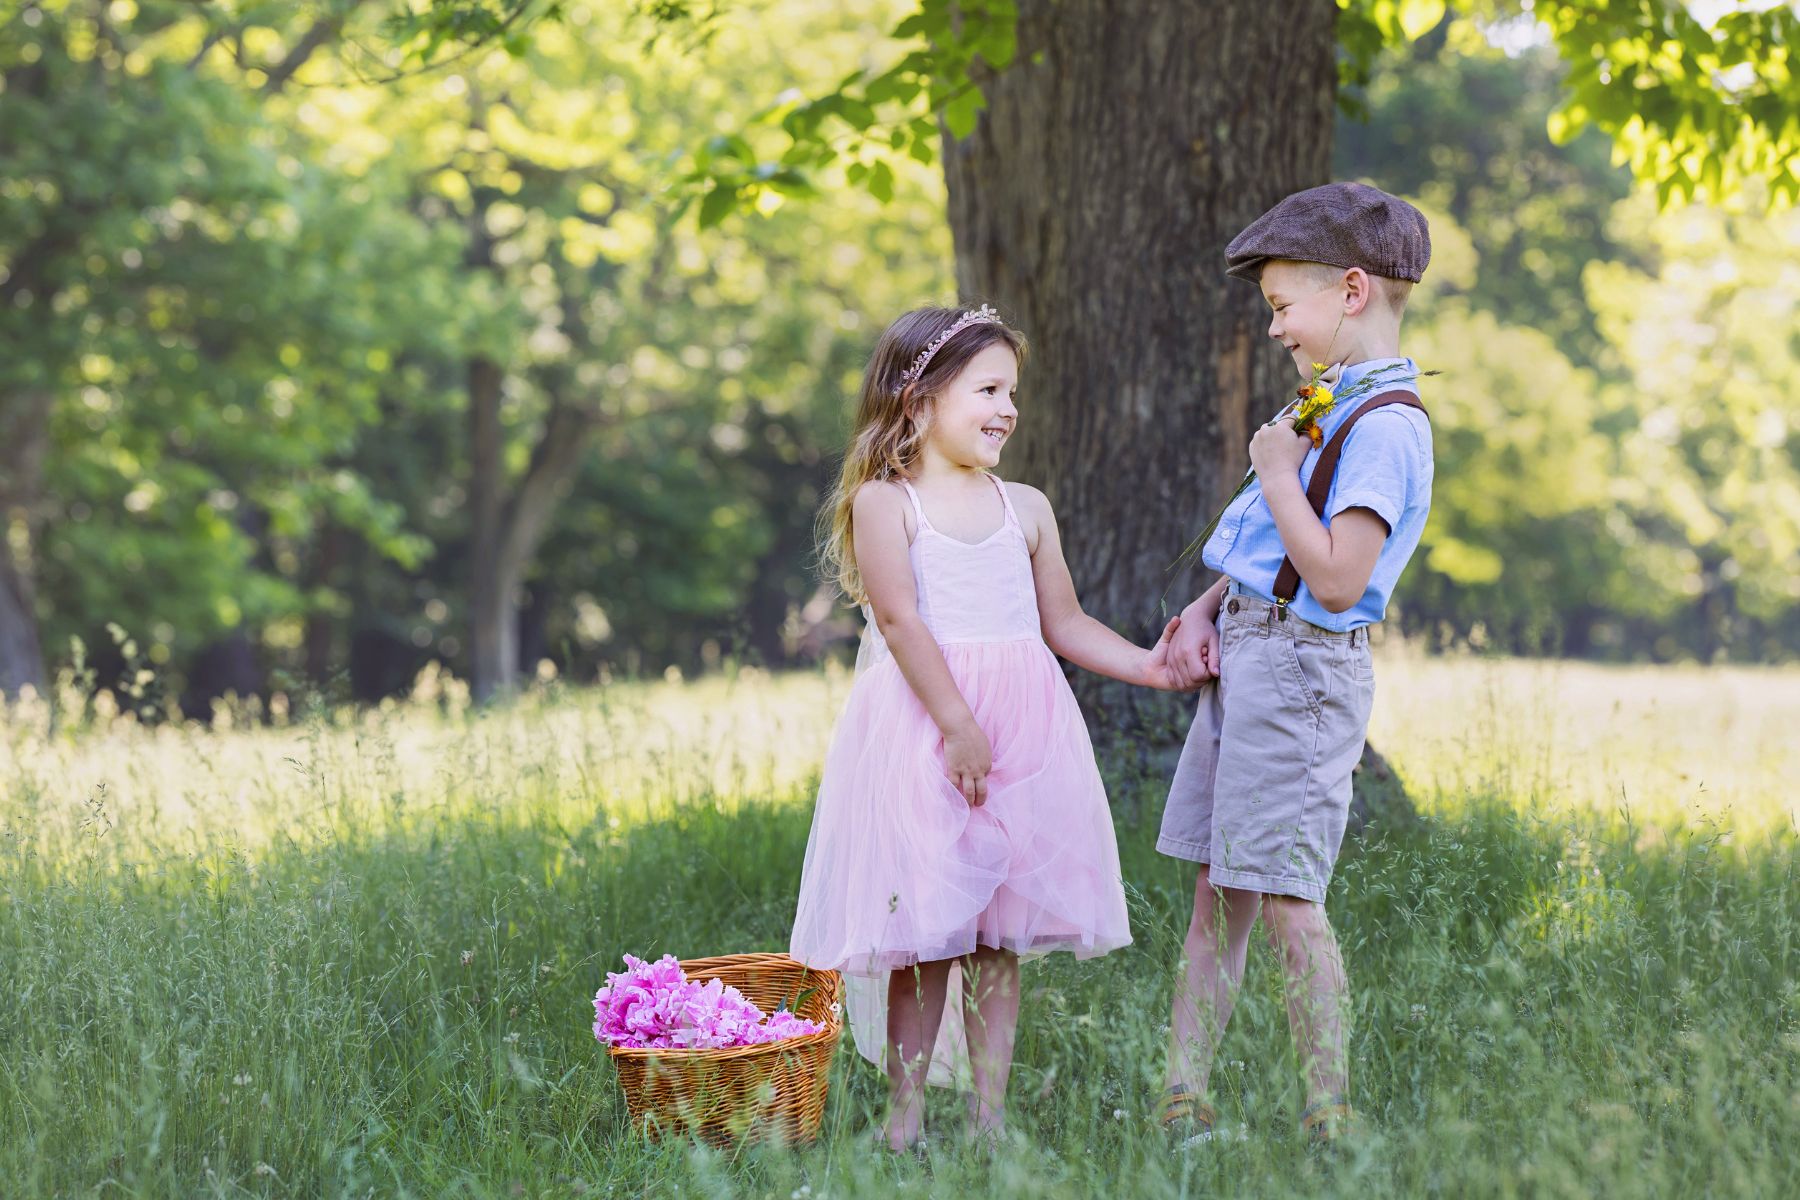 image of a littel boy and girl, brother and sister. They're standing in the tall grass in the shade of a big tree. She has a basket of pink flowers at her feet. He's wearing a newsboy cap and suspenders. They're holding hands as they look at each other.